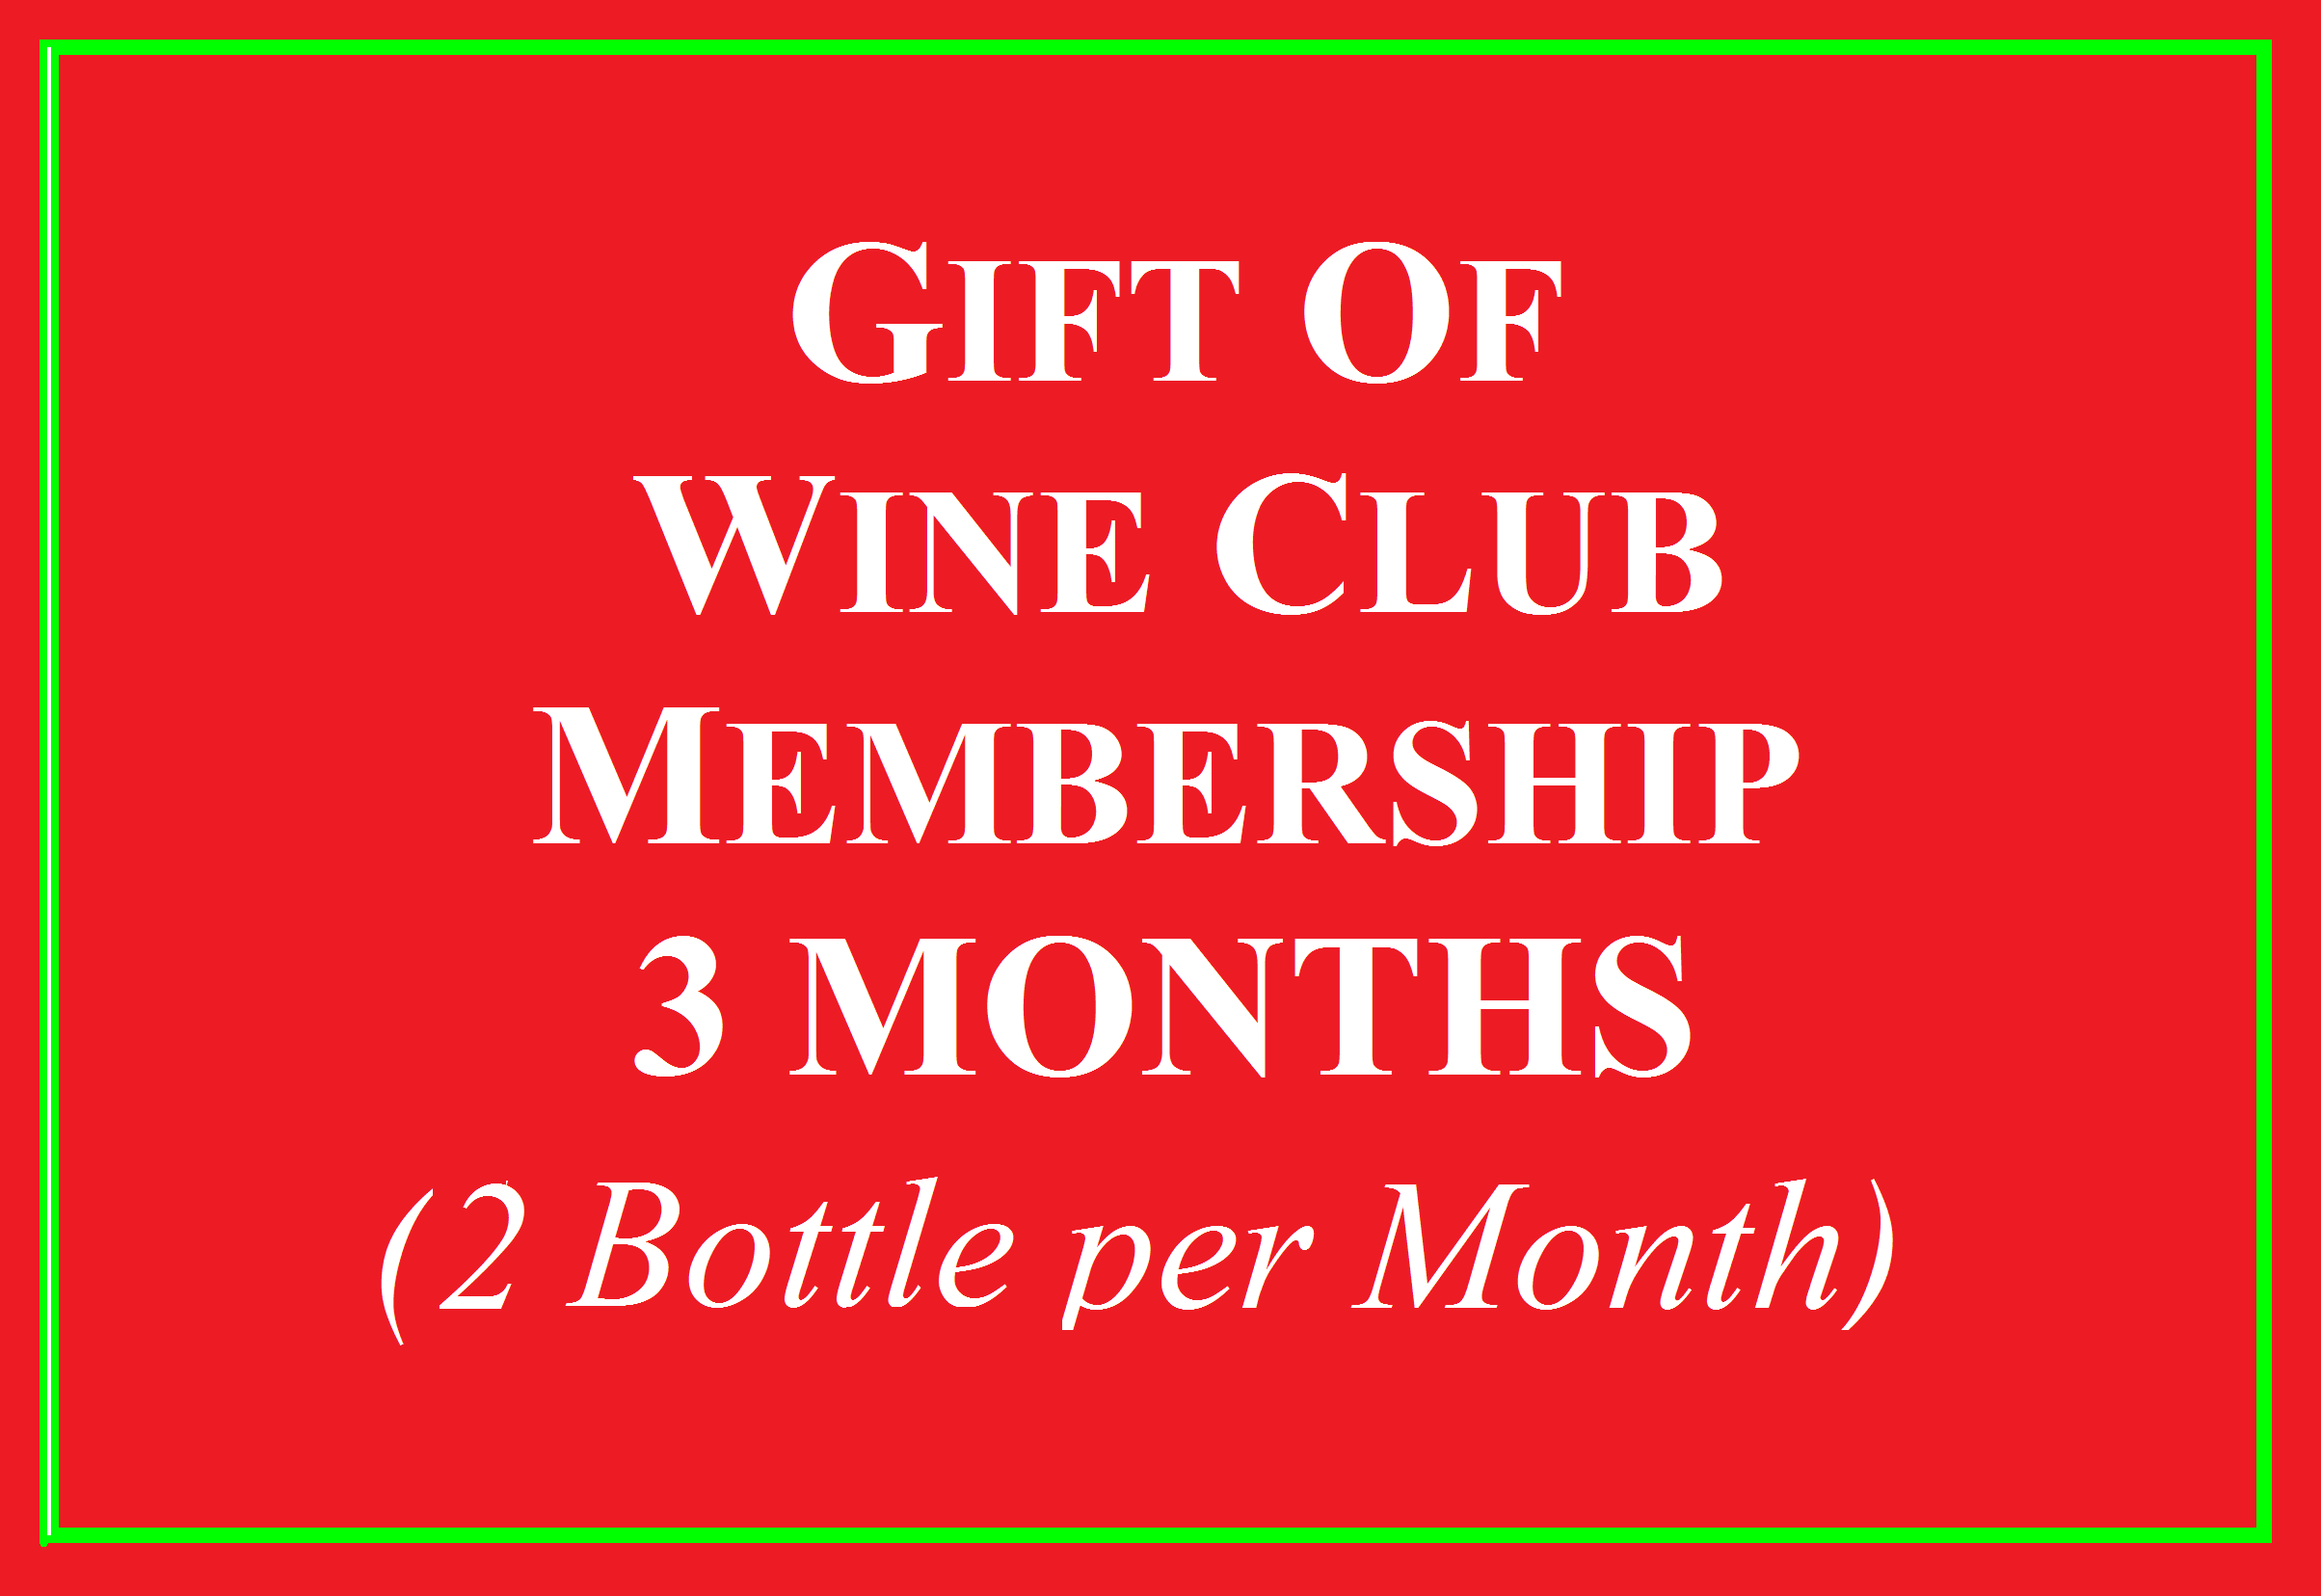 Wine Club Gift for 3 Months 2 Bottle